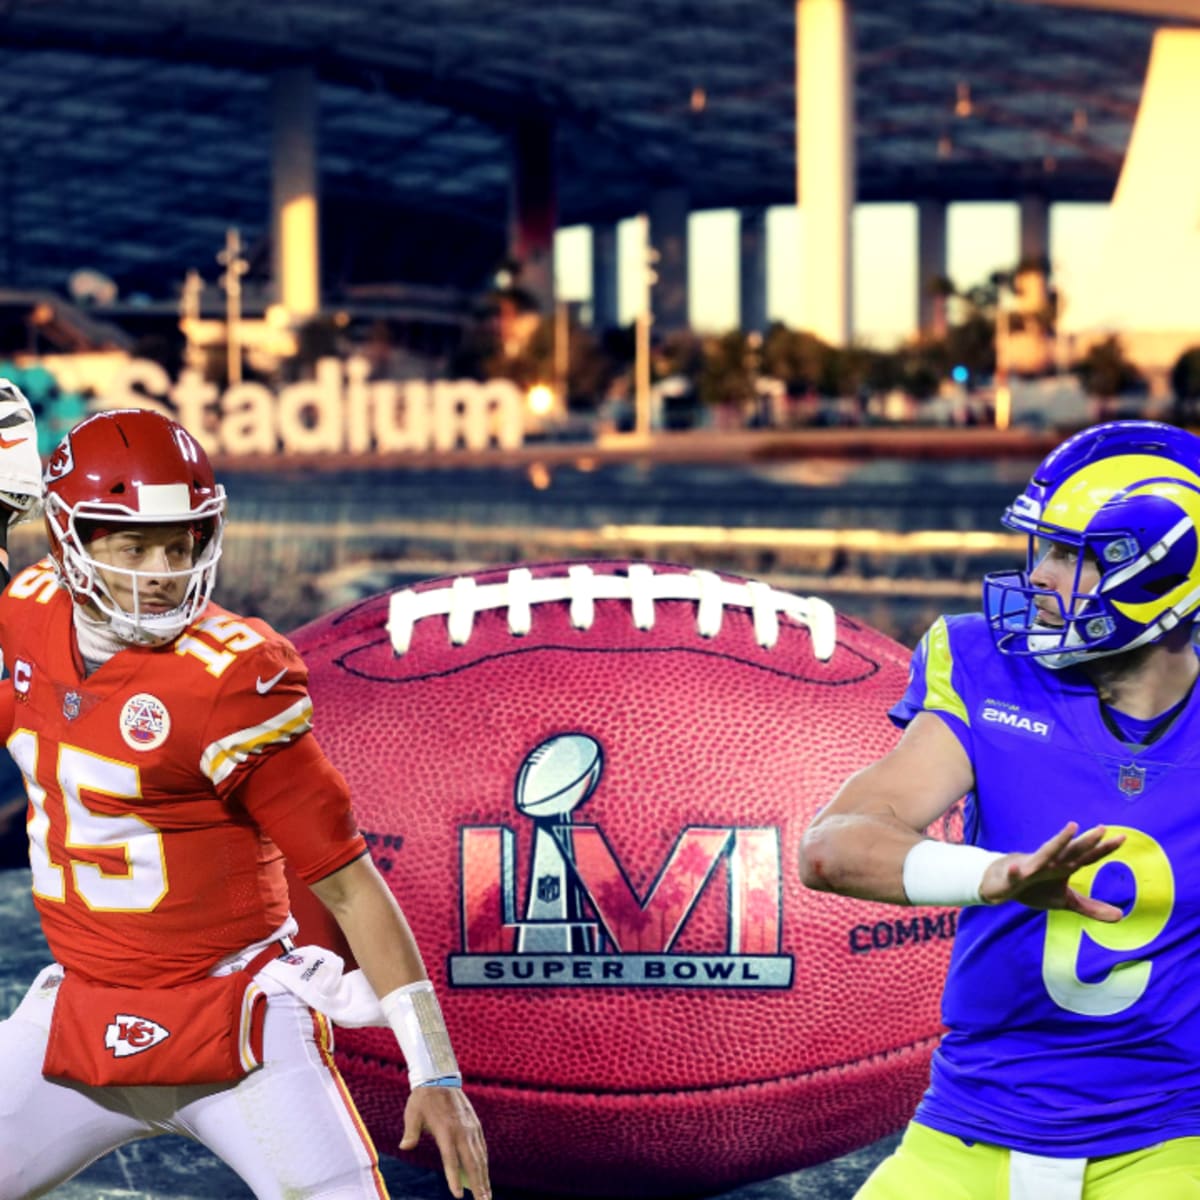 AFC & NFC Championships preview and predictions